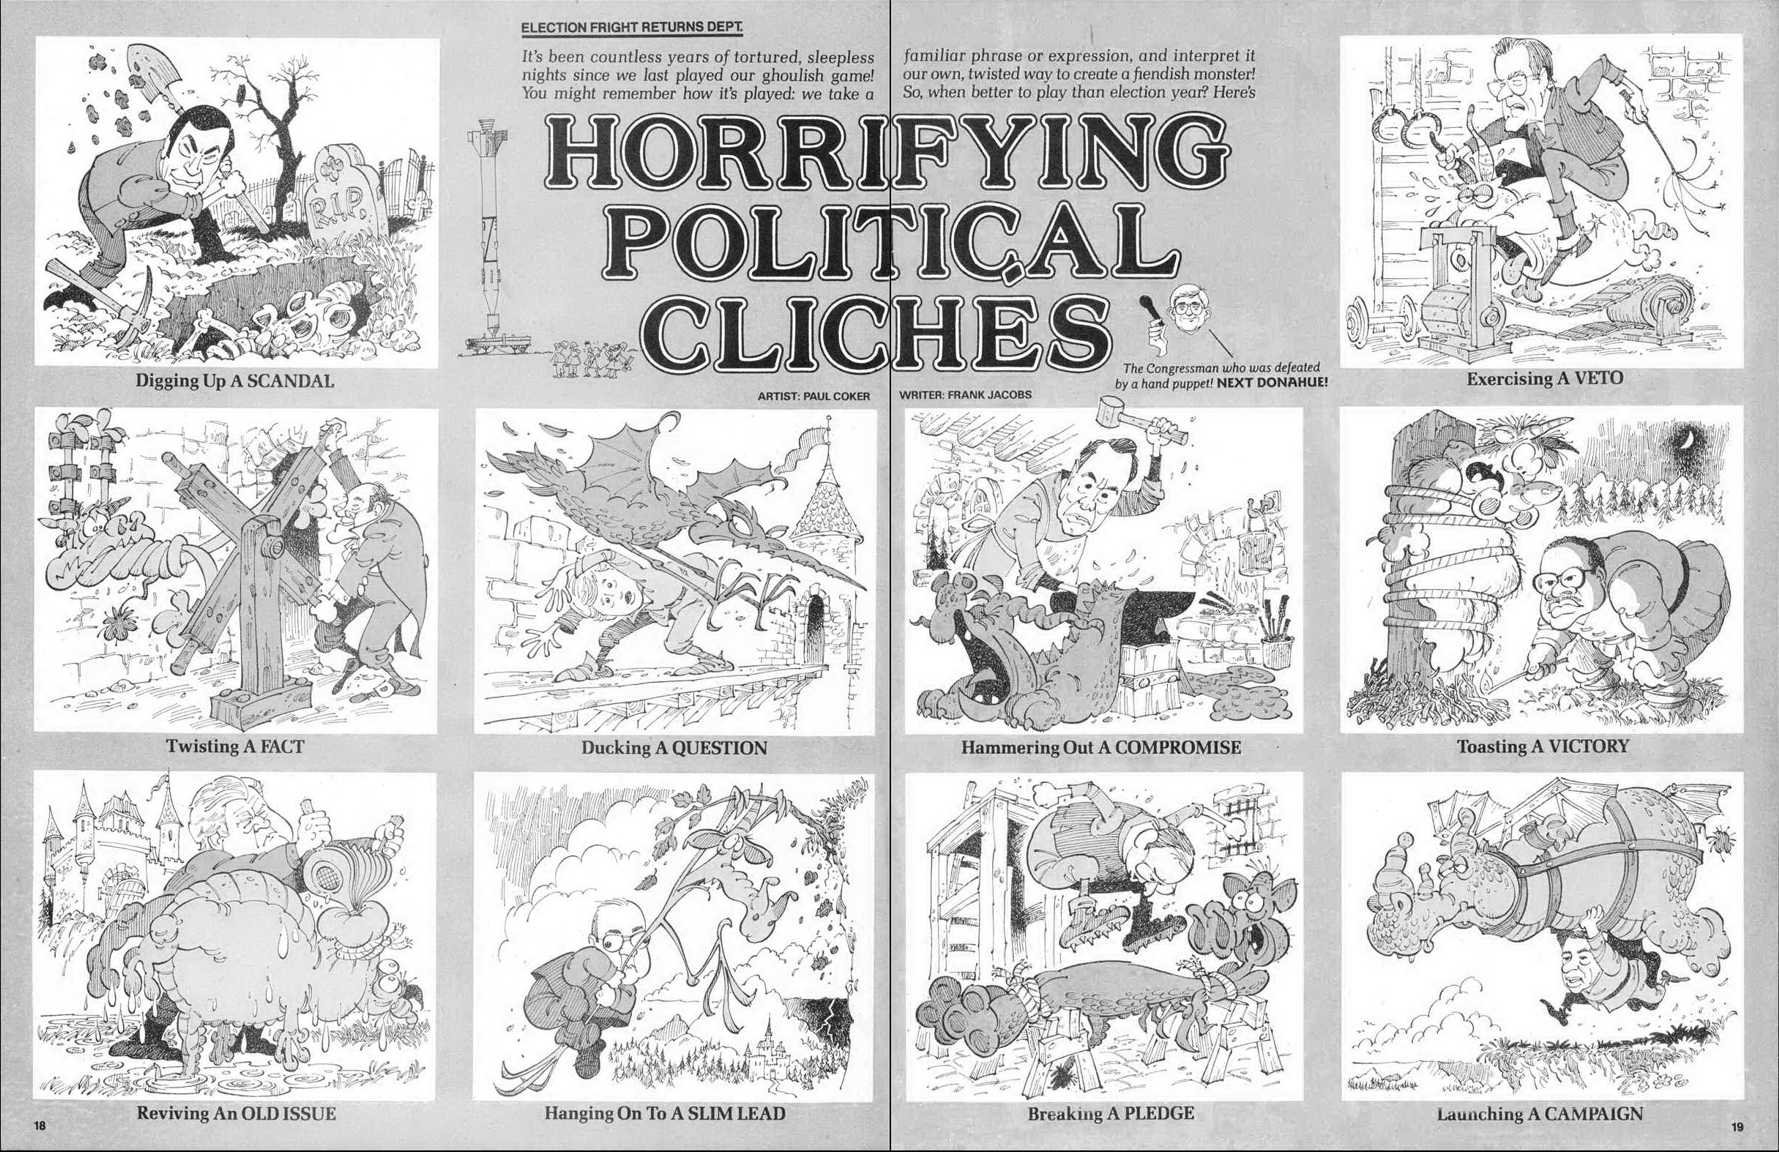 Old issue. Political cliche examples.